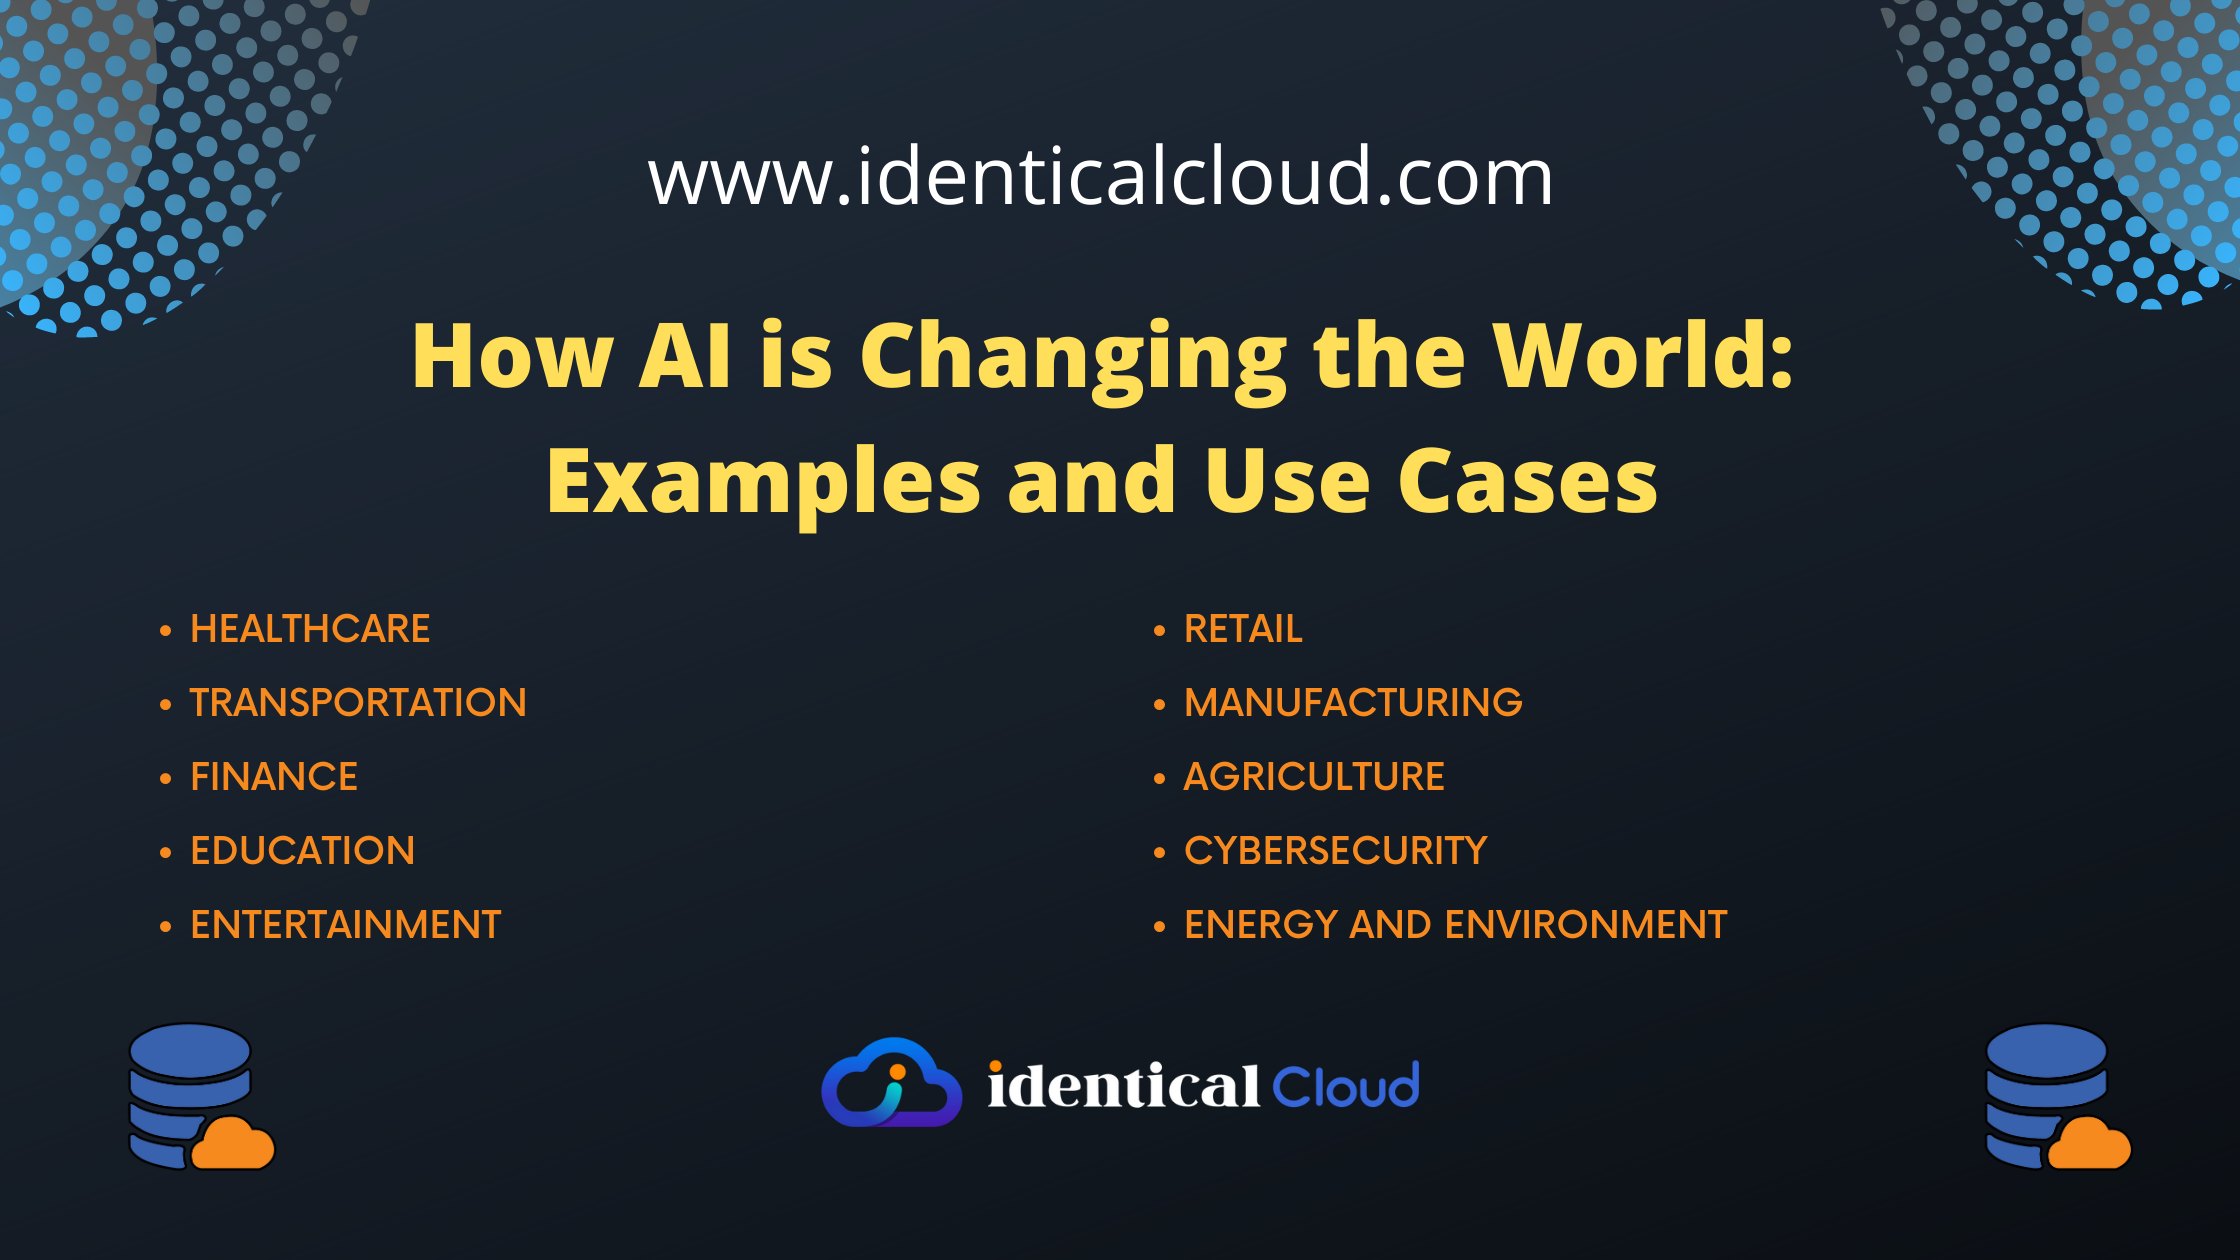 How AI is Changing the World: Examples and Use Cases - identicalcloud.com